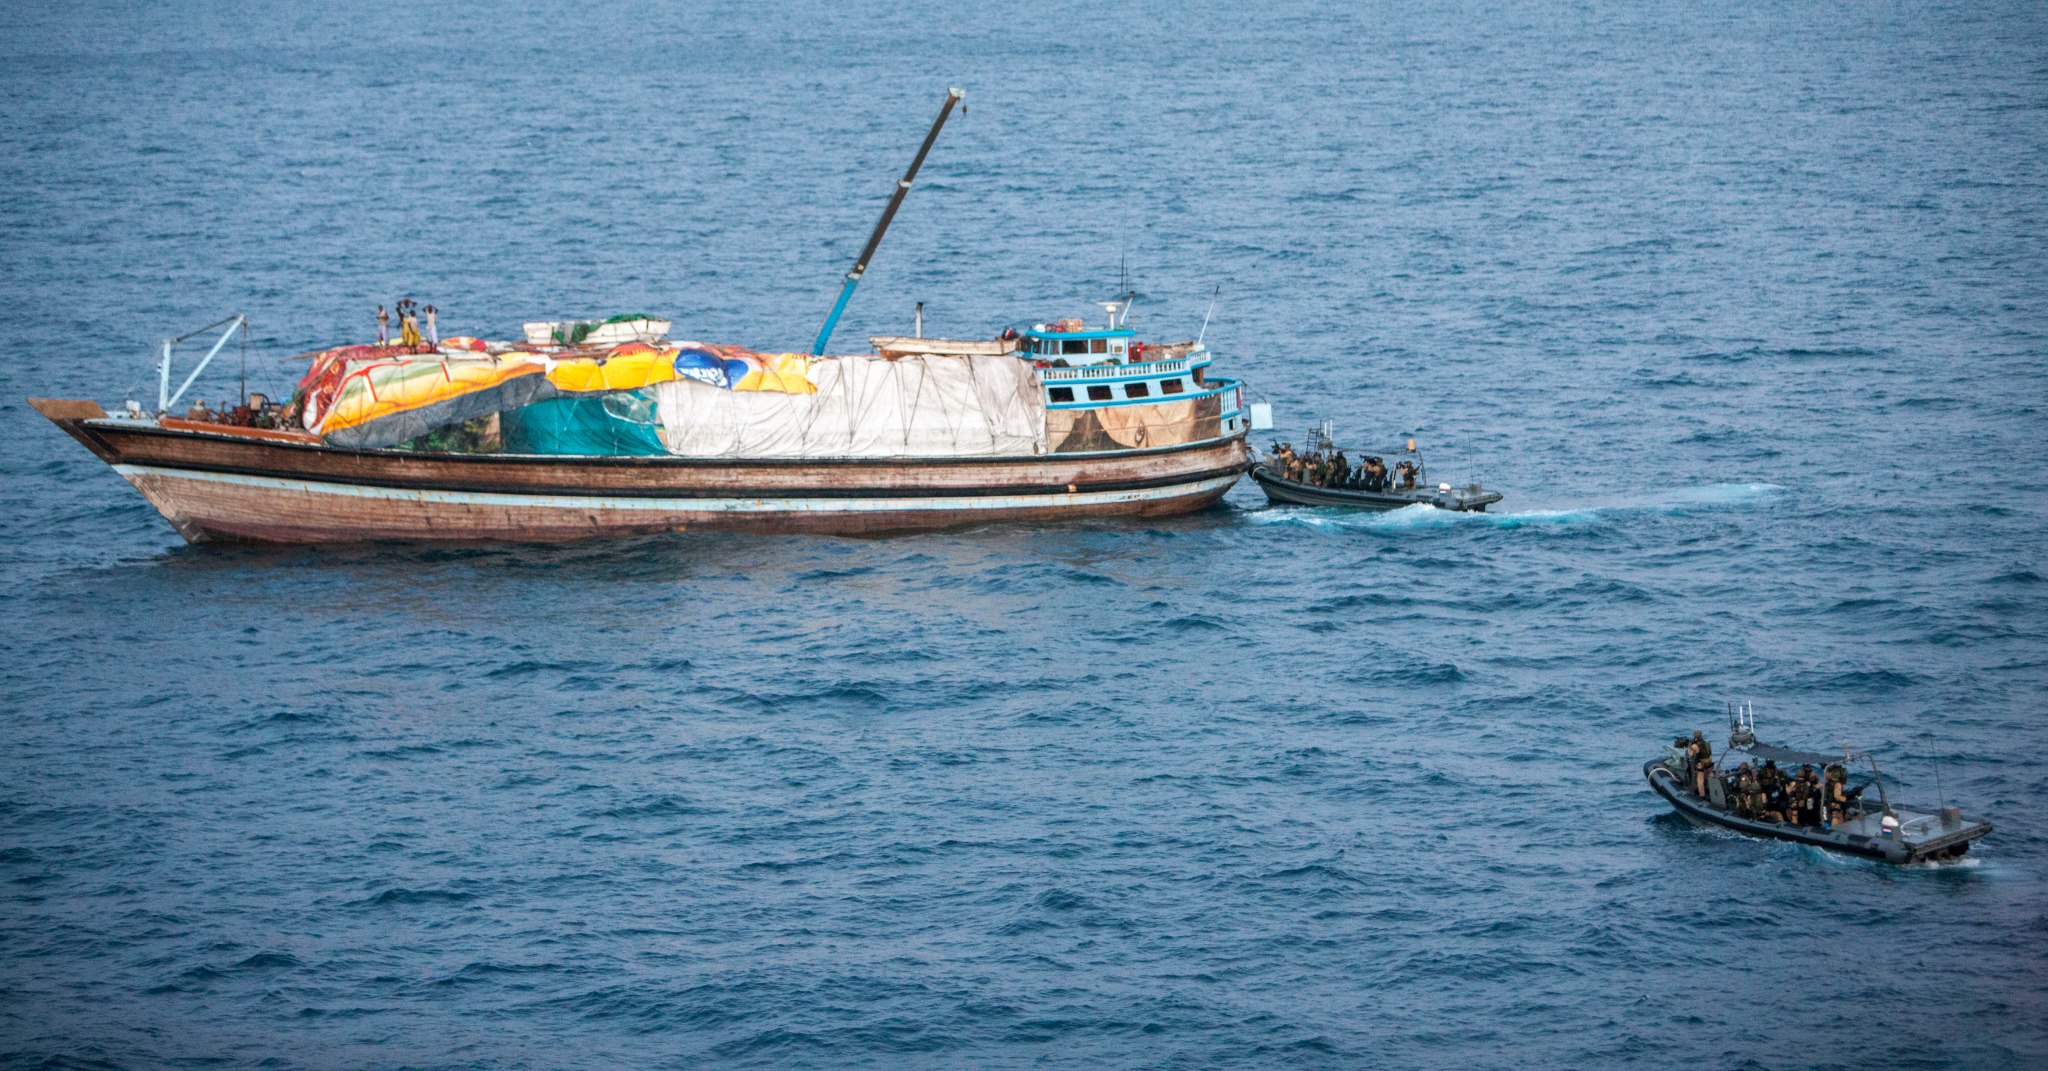 Disrupted dhow; capture 6 pirates - Photo: NATO Oceanshield